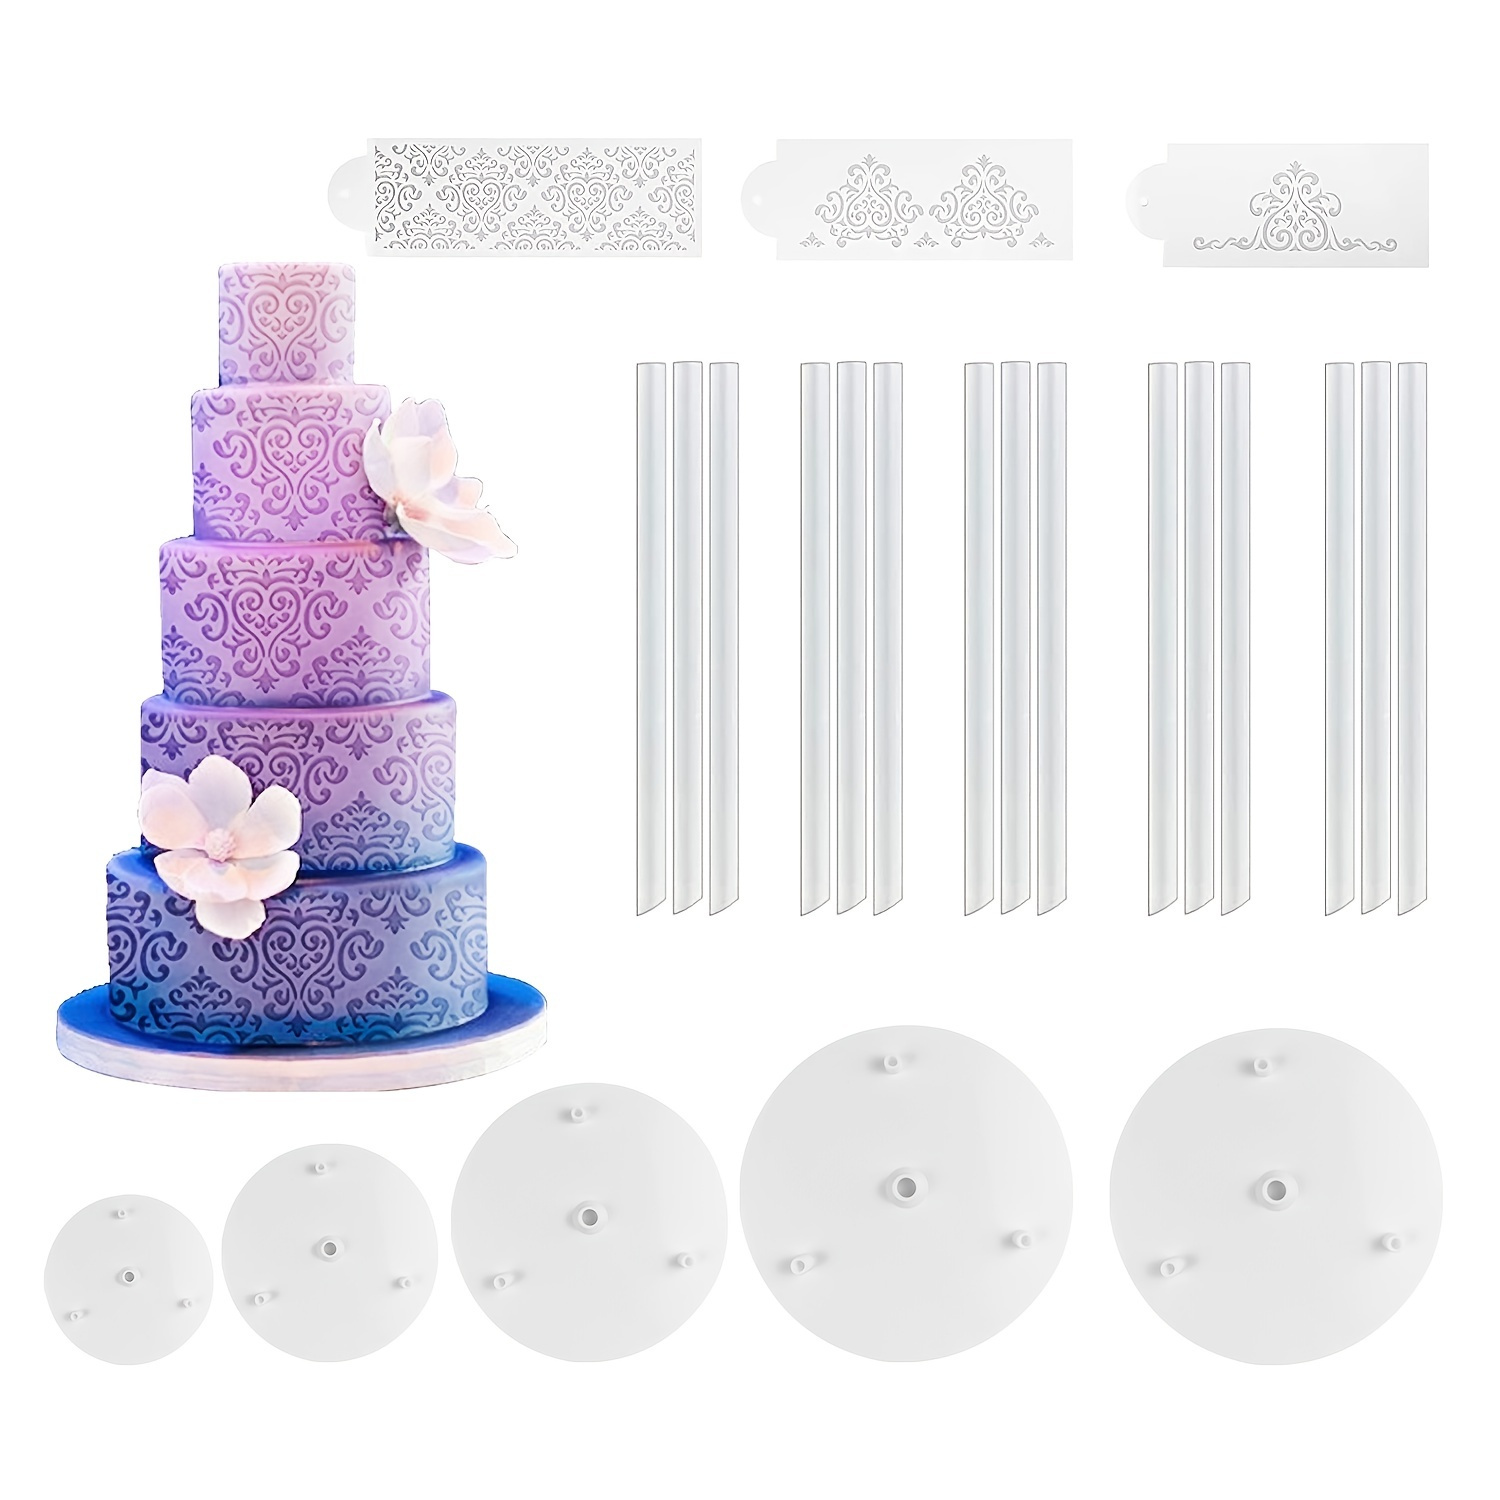 

1 Set, Plastic Tiered Cake Party Supplies Kit, 5pcs Cake Separator Plate And 15pcs Pillar, 3pcs Cake Border Spray Templates, Reusable Cake Stand, Perfect For Weddings, Parties, Muffin Cakes